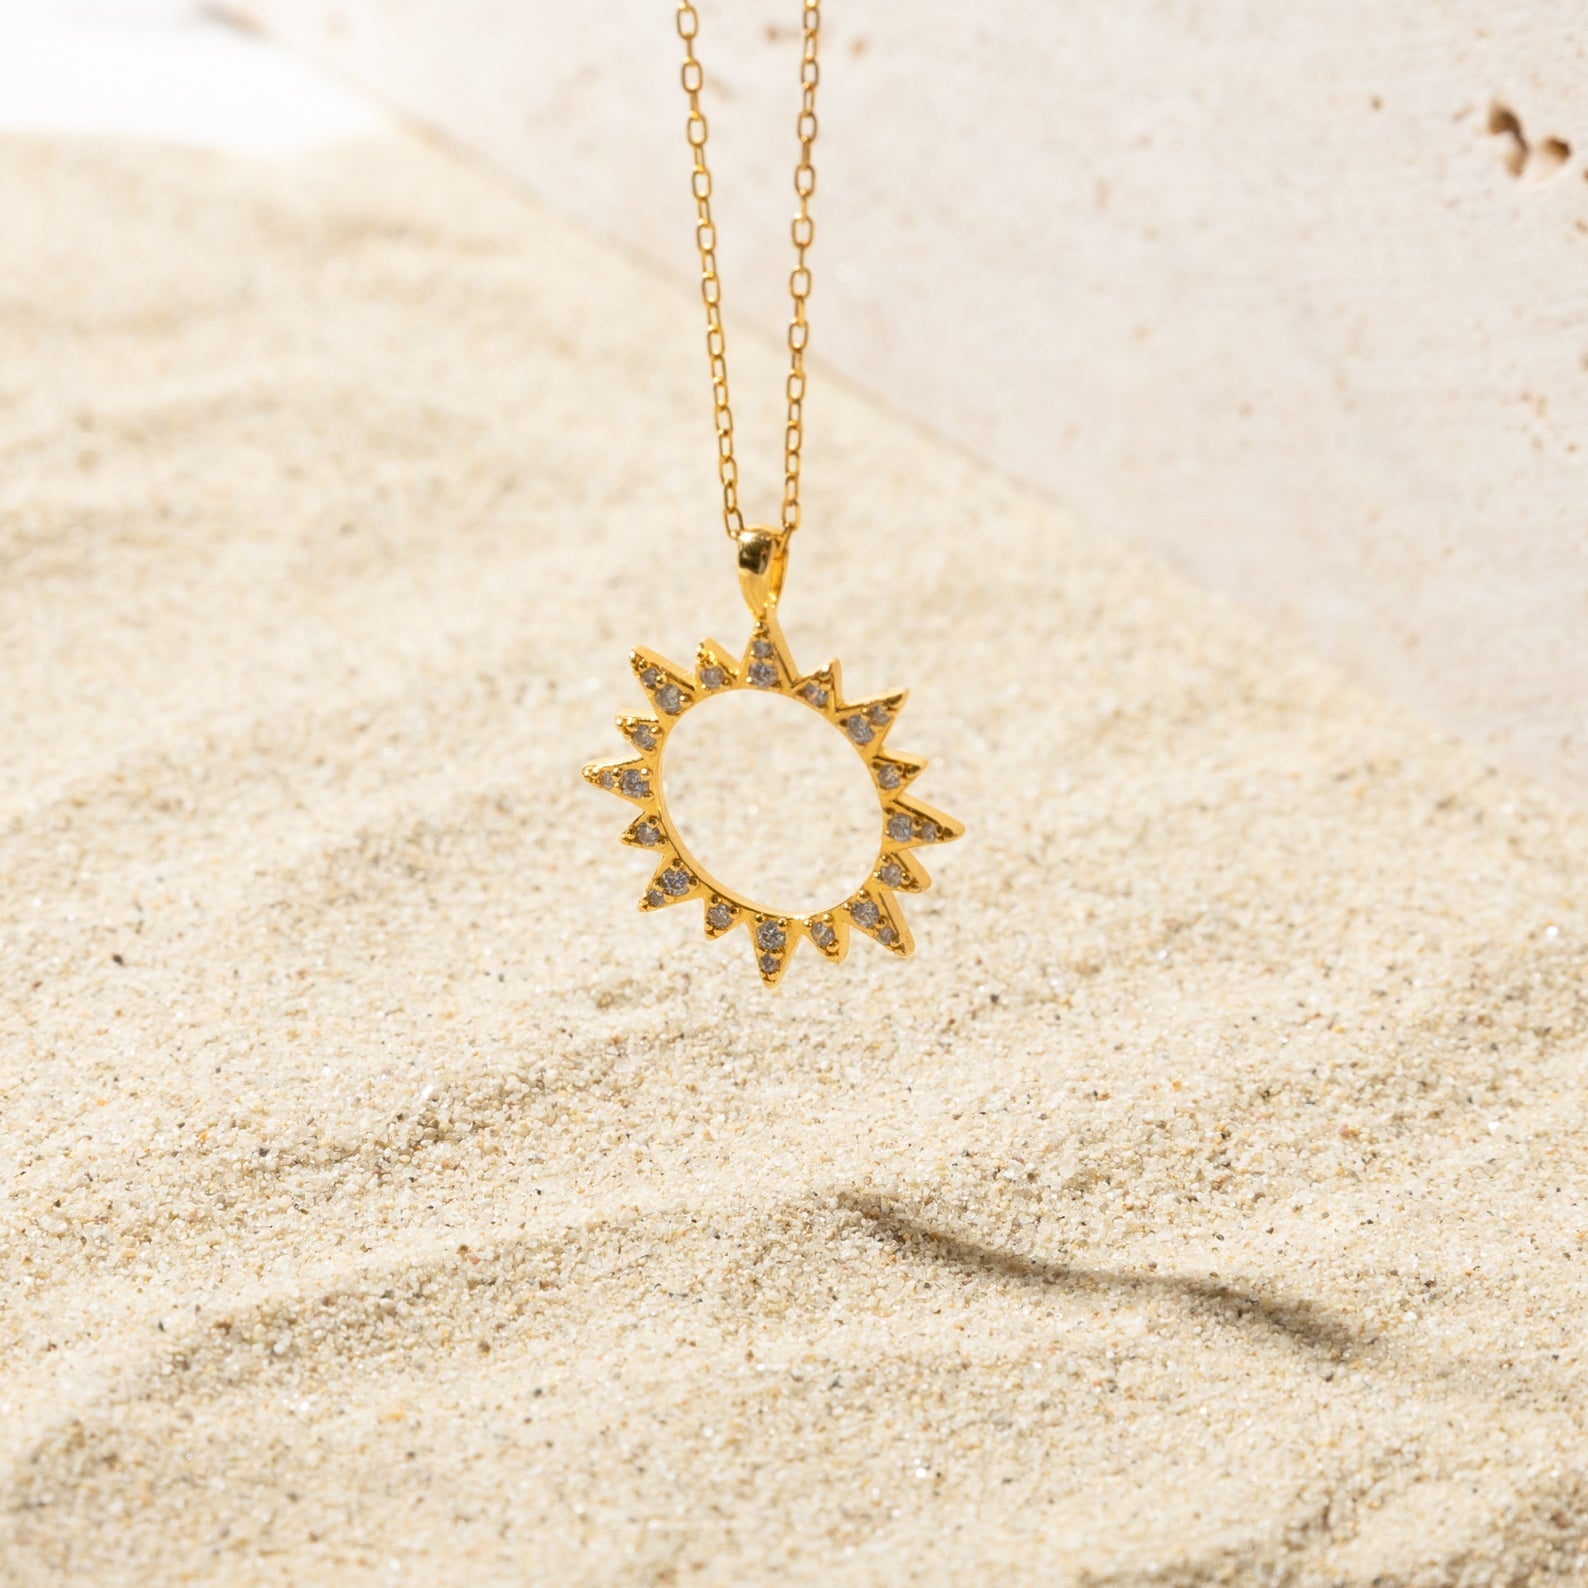 Buy Gold Plated Sun Necklace Gold Plated Chain Necklace Sun Jewelry Thin  Chain Necklace Gift for Her Boho Necklace Sunshine Online in India - Etsy